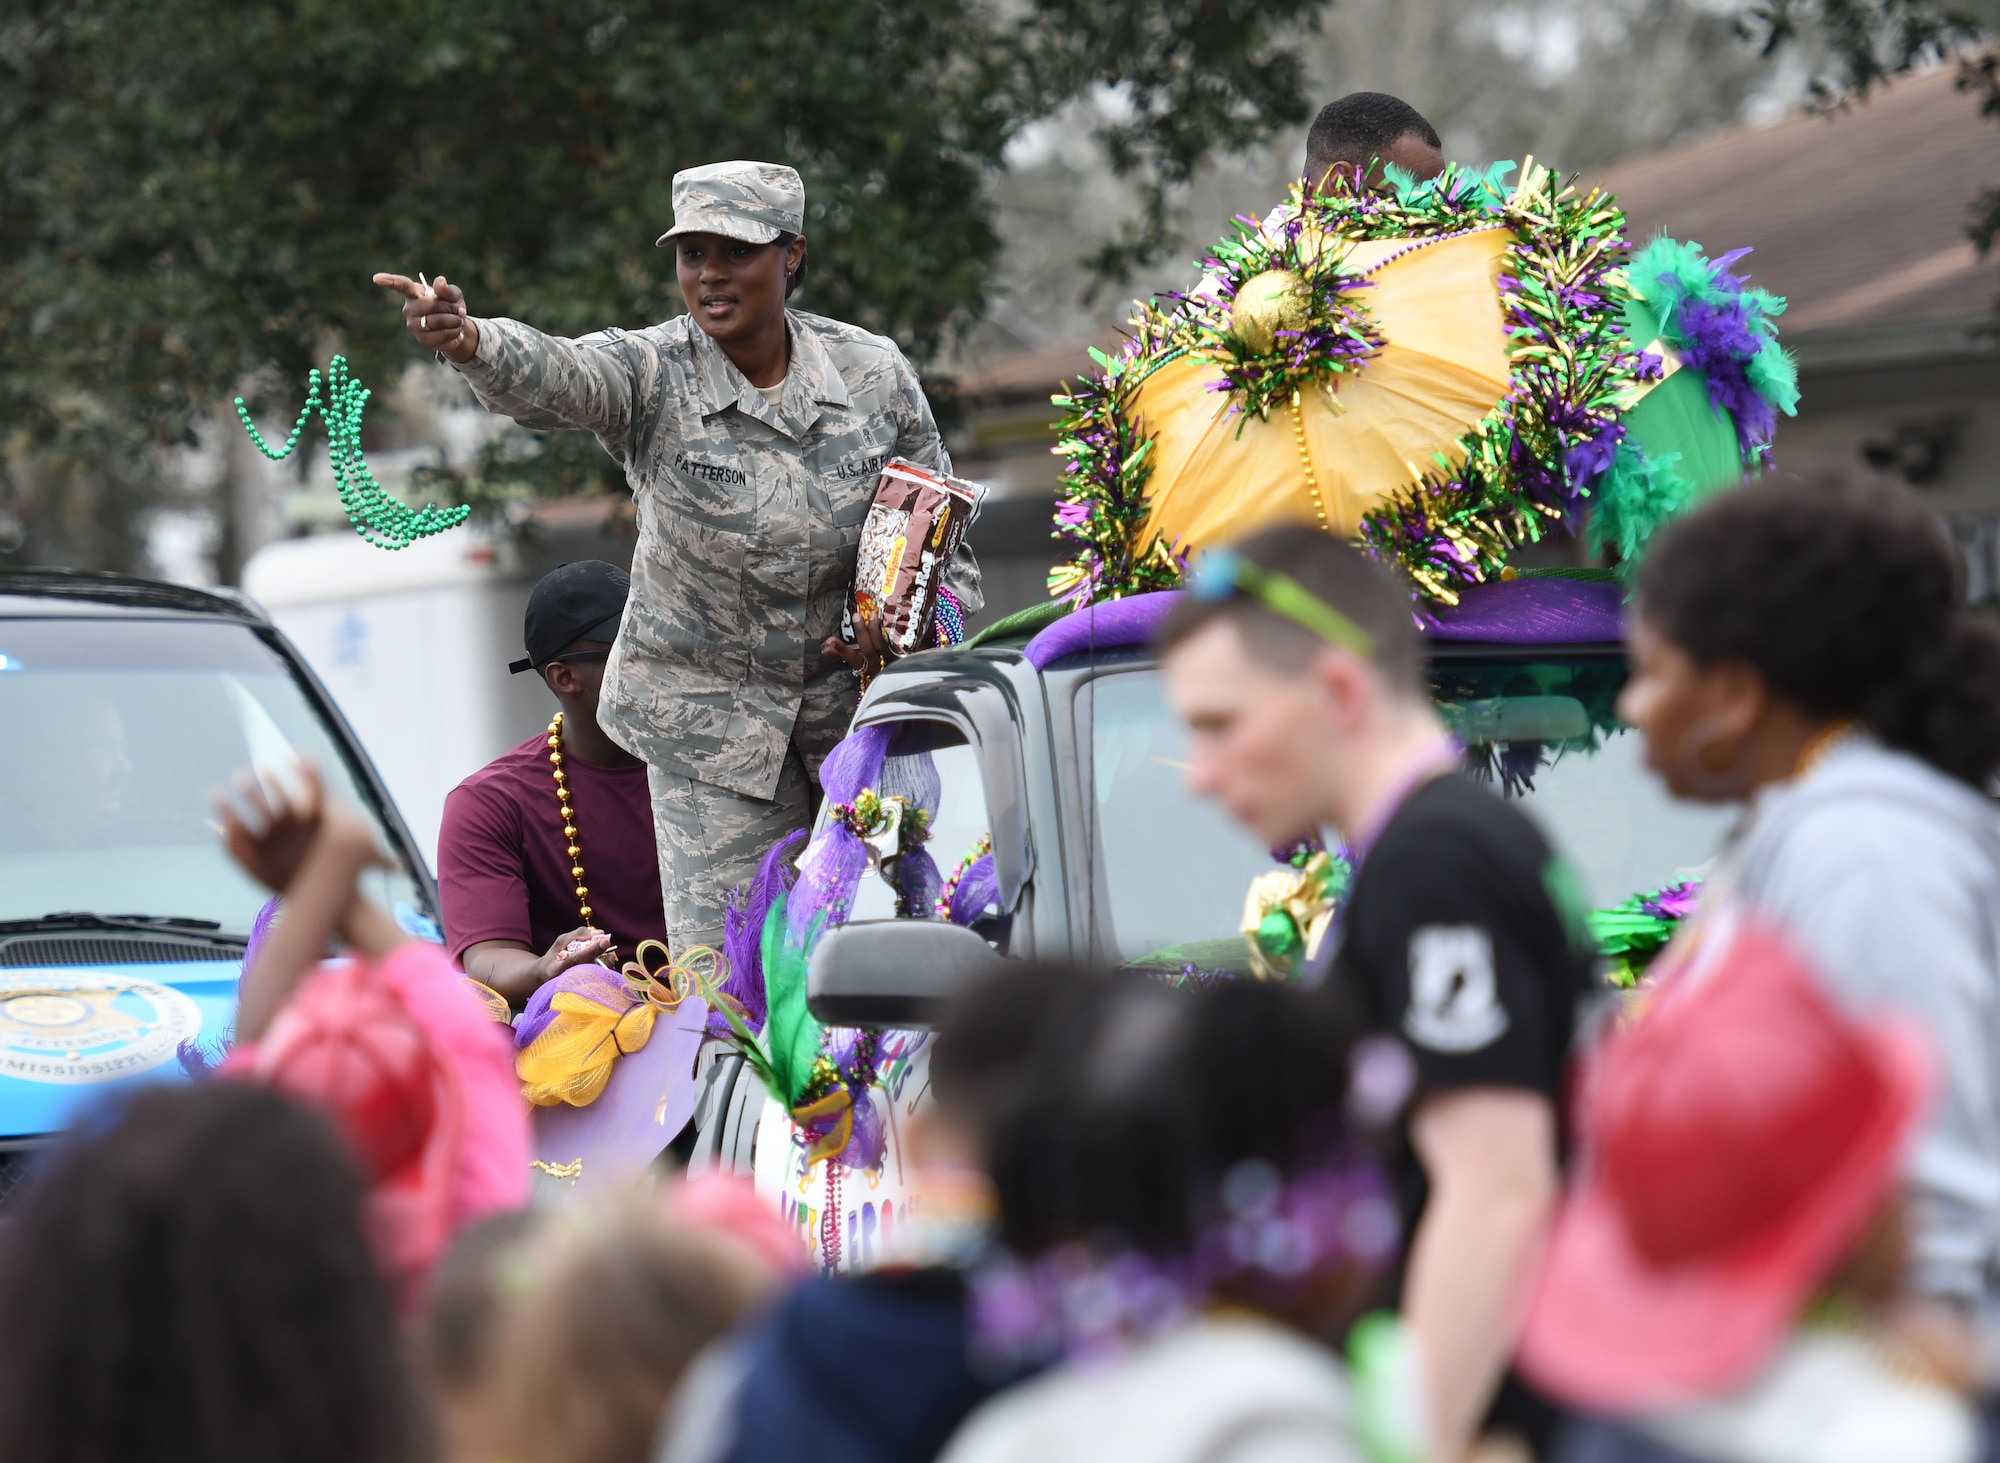 Senior Master Sgt. Tiffany Patterson, 81st Force Support Squadron career assistance advisor, throws beads during the Jeff Davis Elementary School Mardi Gras parade Feb. 9, 2018, in Biloxi, Mississippi. Keesler leadership and other base personnel participated in the festivities. (U.S. Air Force photo by Kemberly Groue)